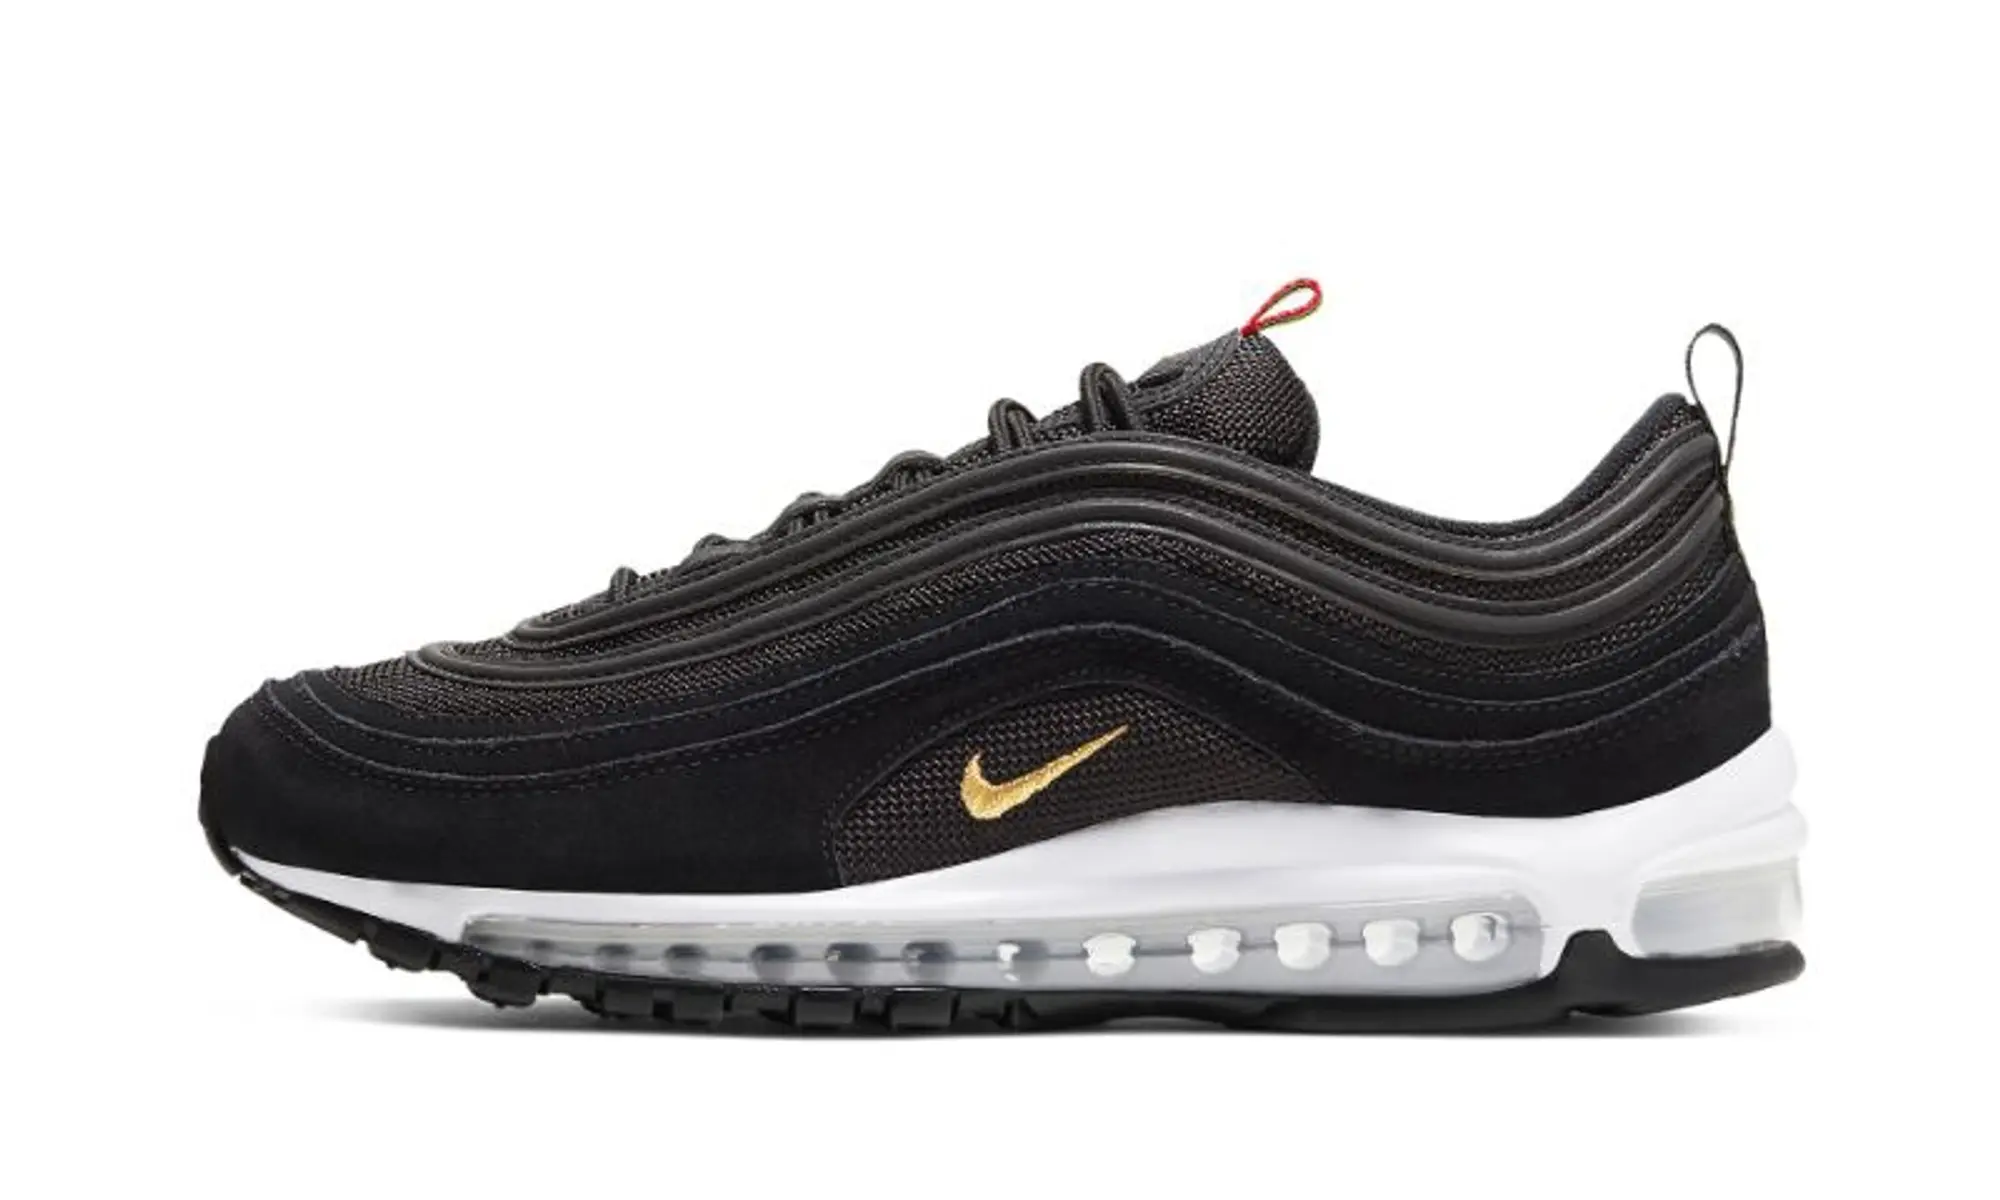 Nike Air Max 97 Olympic Rings Pack - Black Shoes